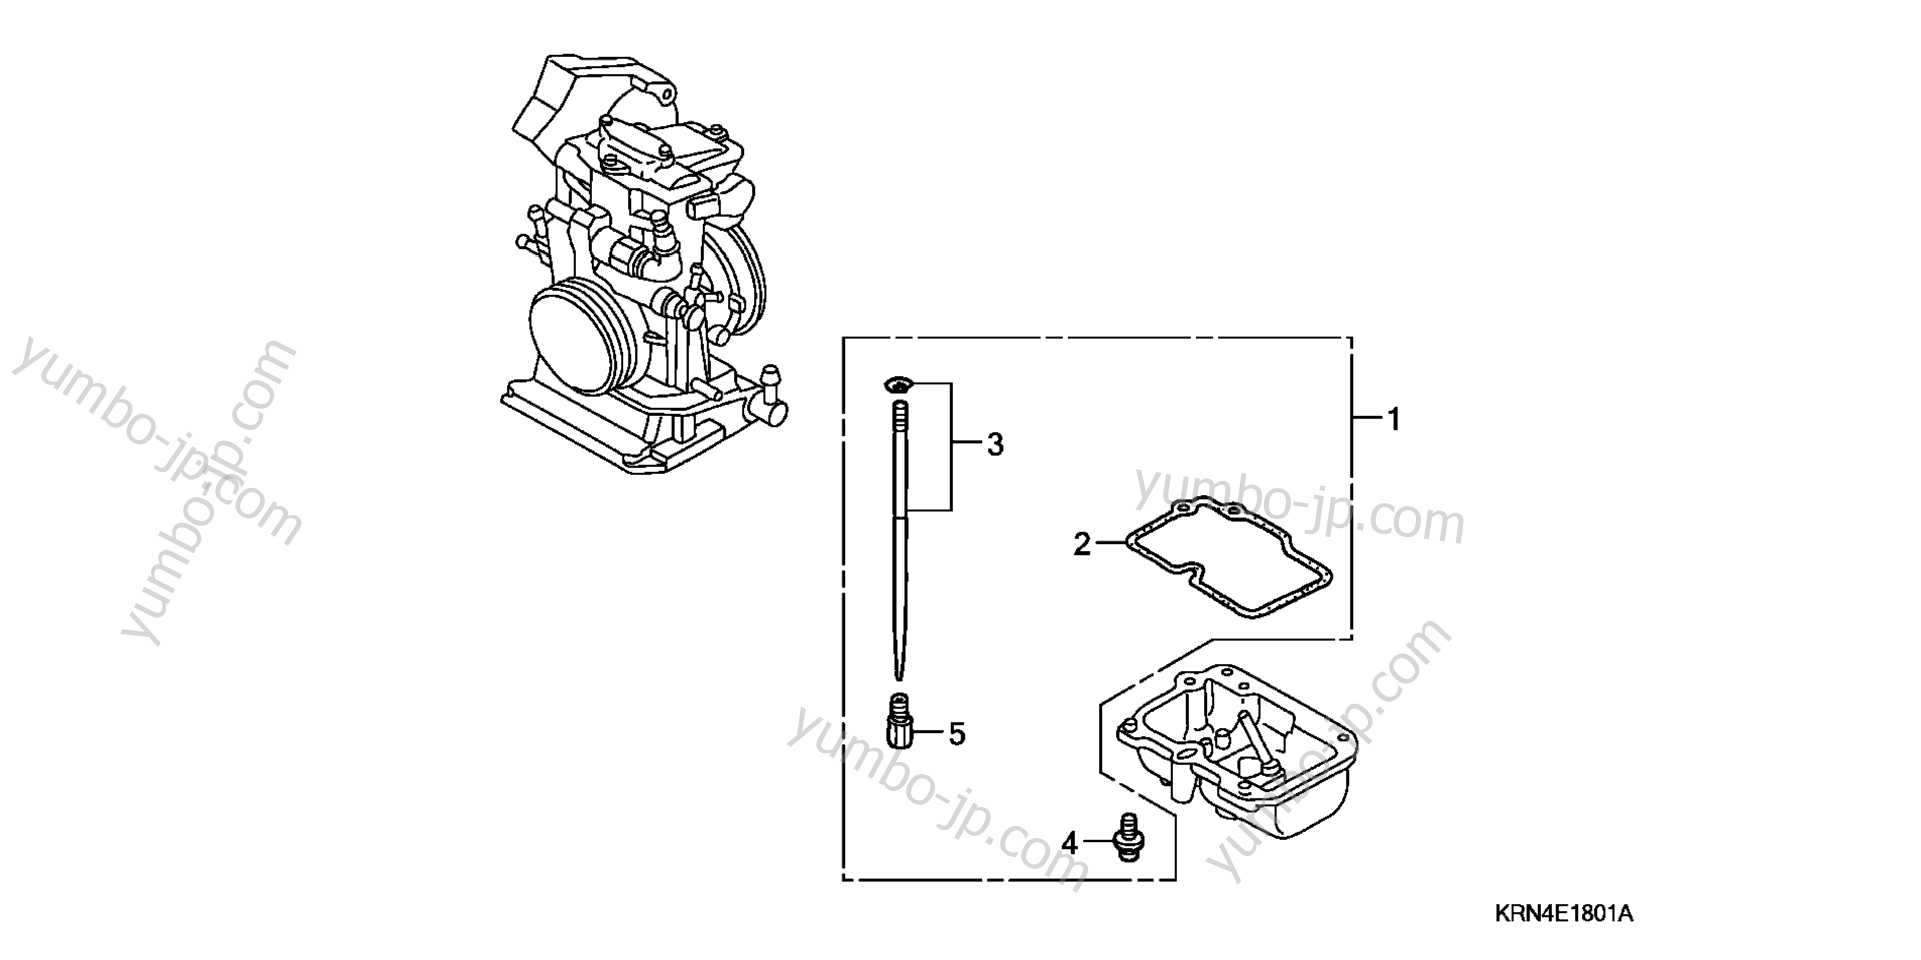 CARBURETOR OPTIONAL KIT for motorcycles HONDA CRF250R A/A 2006 year